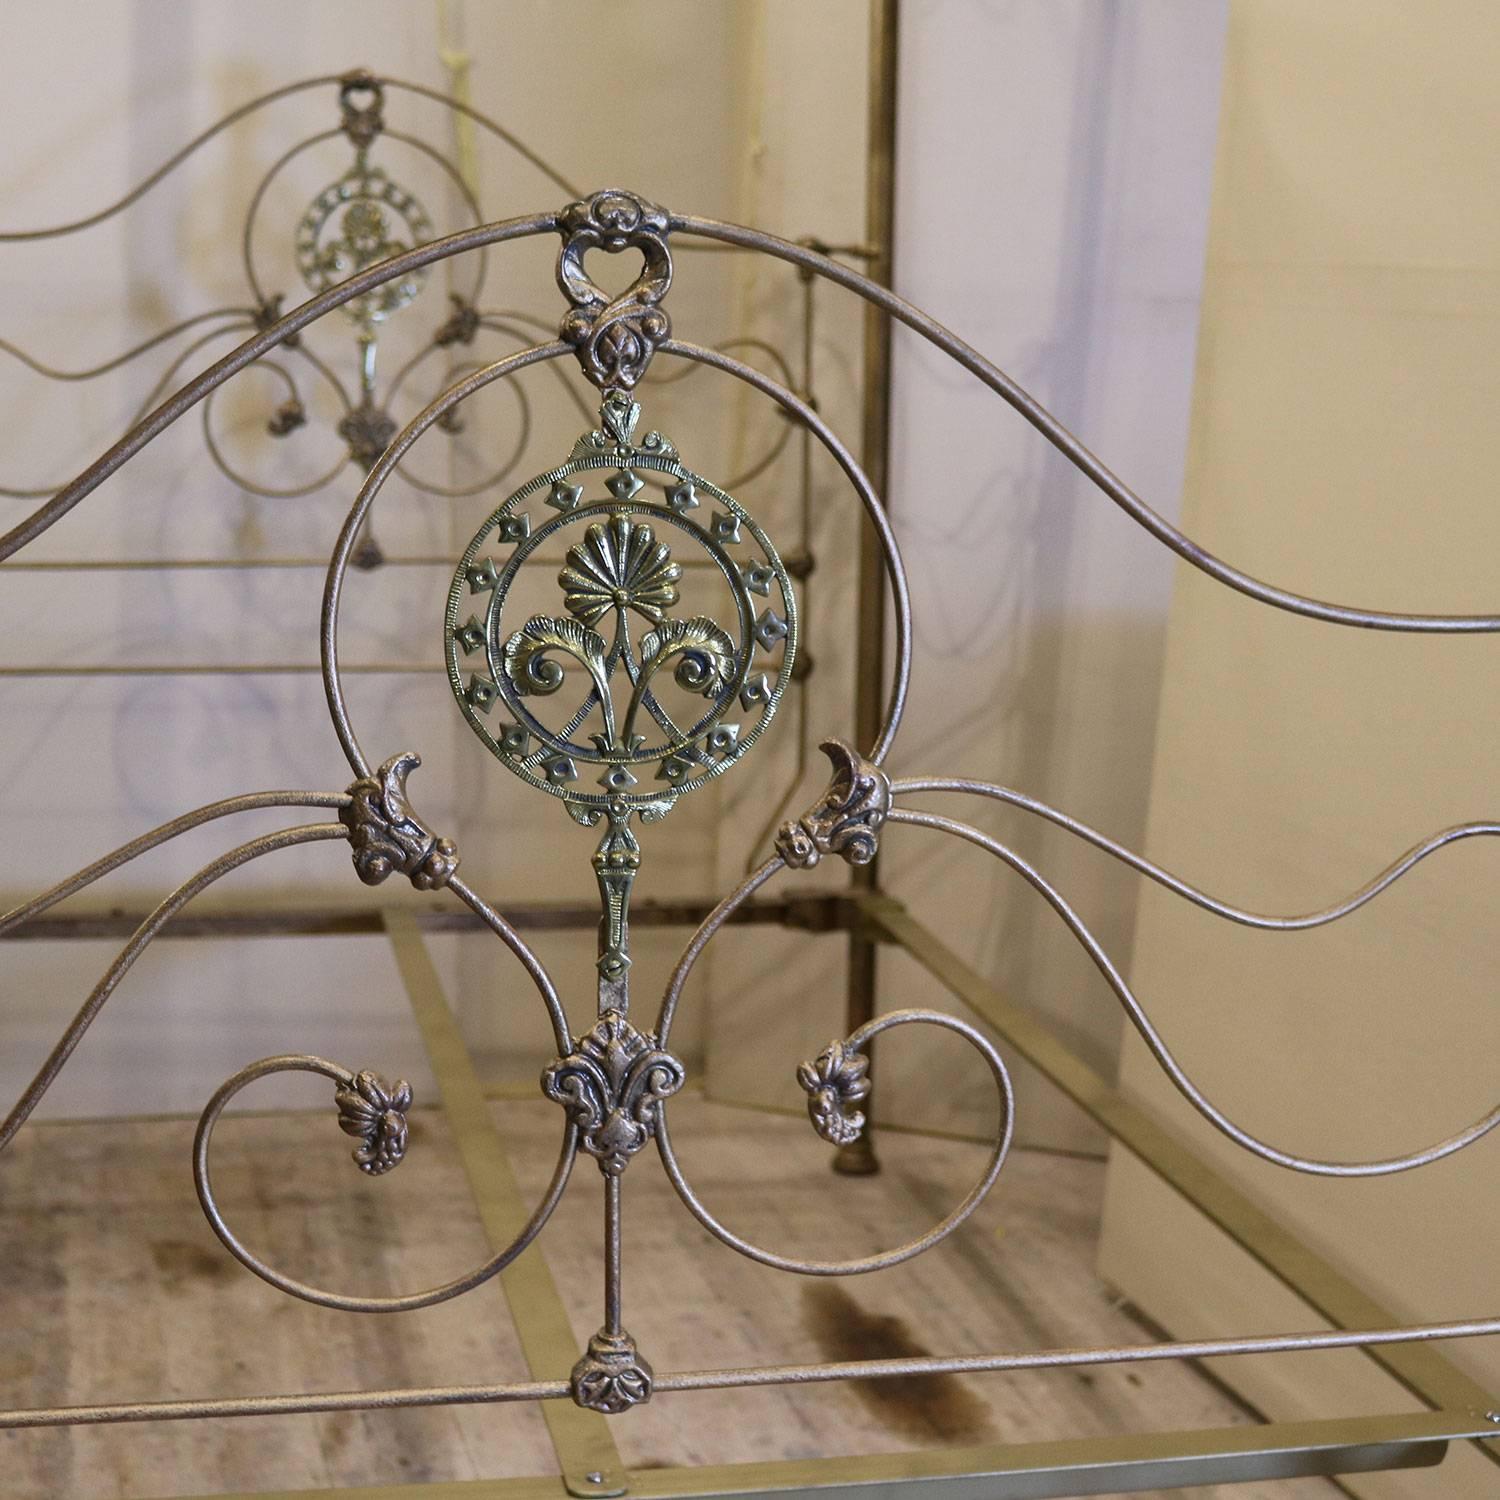 A cast iron half tester bed from the mid-Victorian era finished in gold with decorative brass fittings and brass central casting. The tall half round canopy can be used to suspend drapes, or left bare, or totally removed if required. M4P22.

This